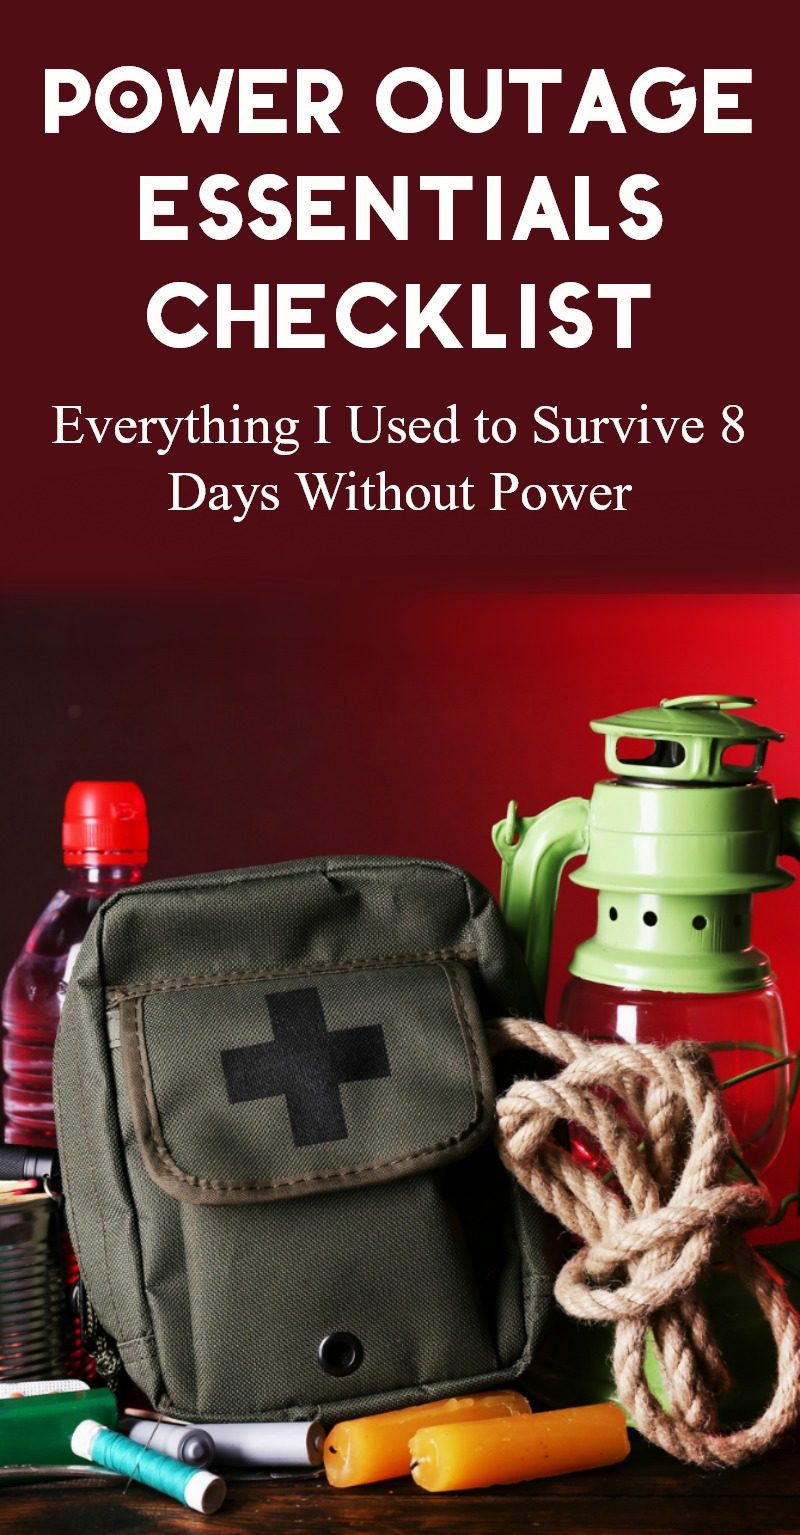 Power Outage Essentials Checklist: Everything I Used To Survive 8